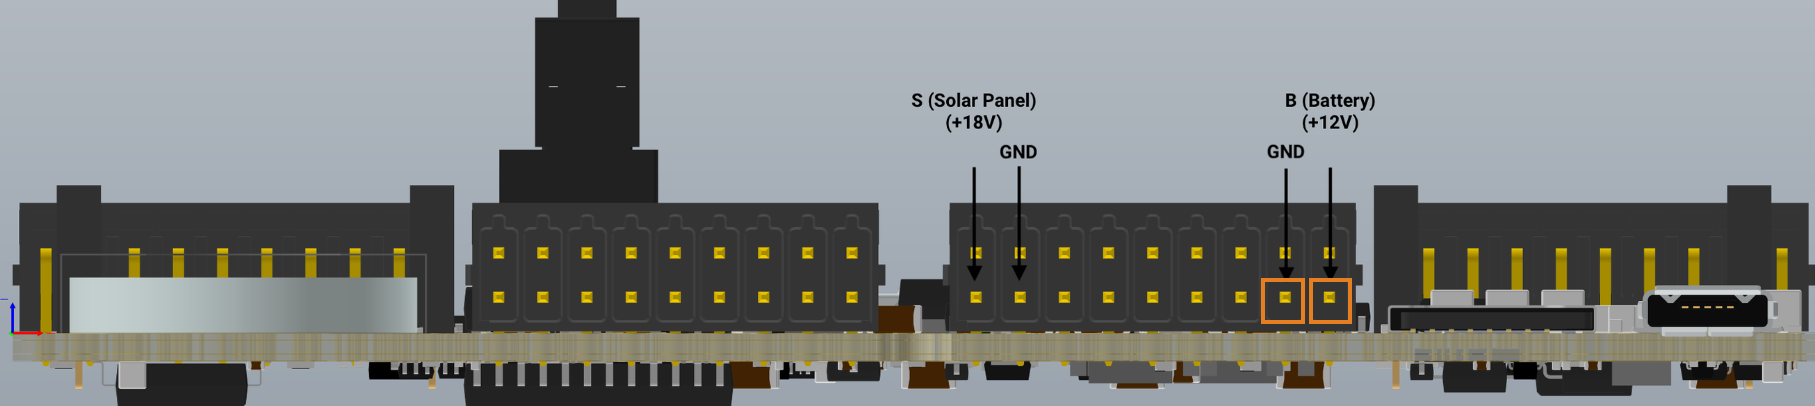 Schematic with B (Battery) and GND (Ground) pins highlighted